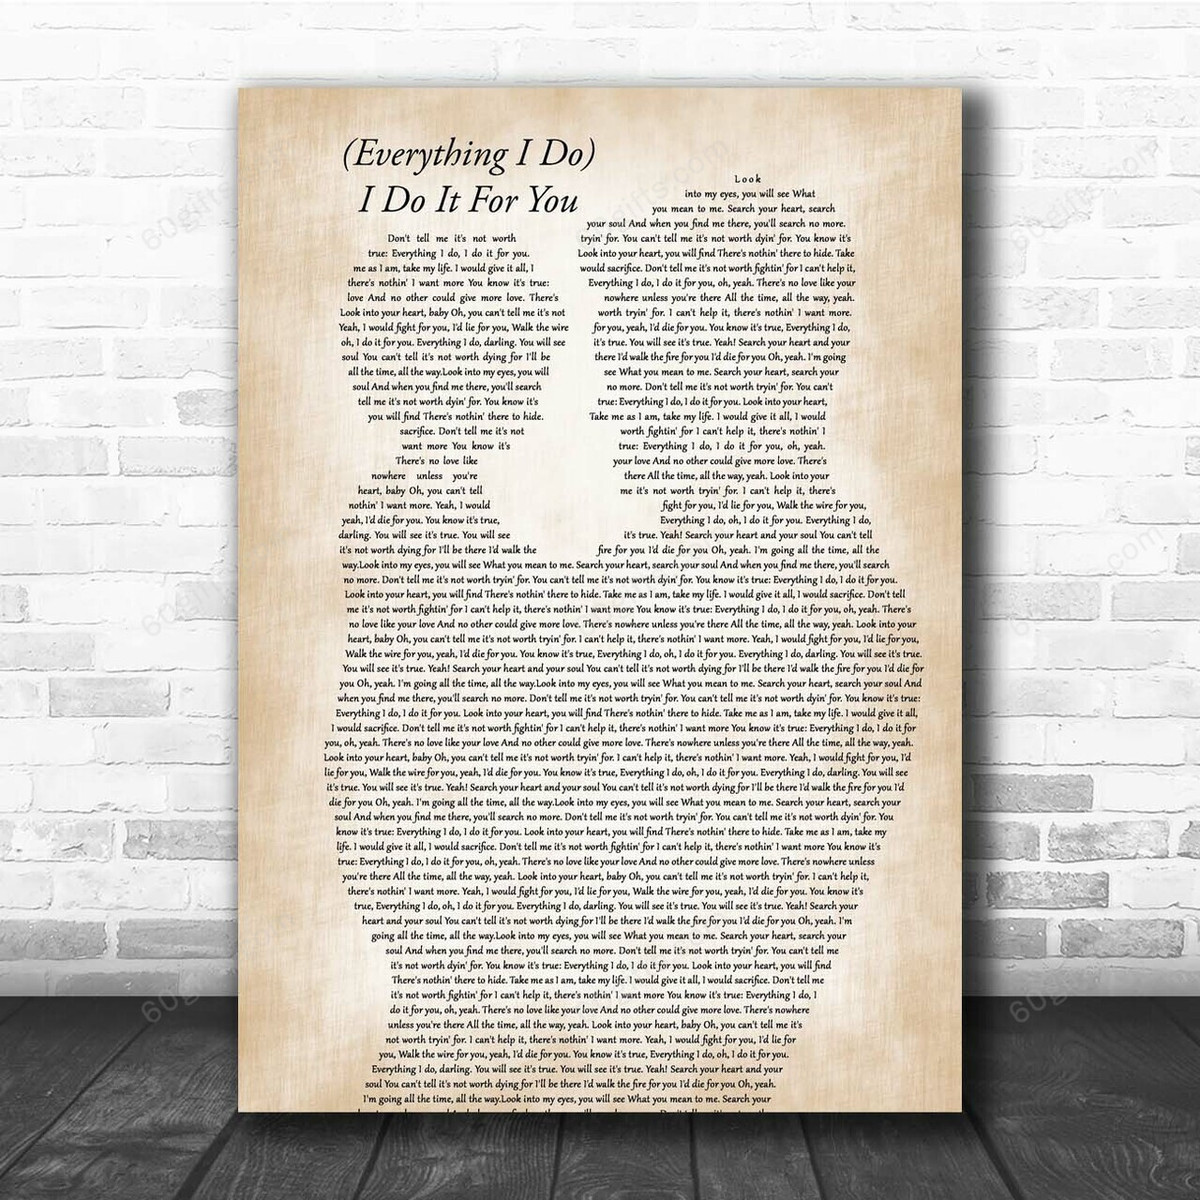 Bryan Adams (Everything I Do) I Do It For You Father & Child Song Lyric Art Print - Canvas Print Wall Art Home Decor